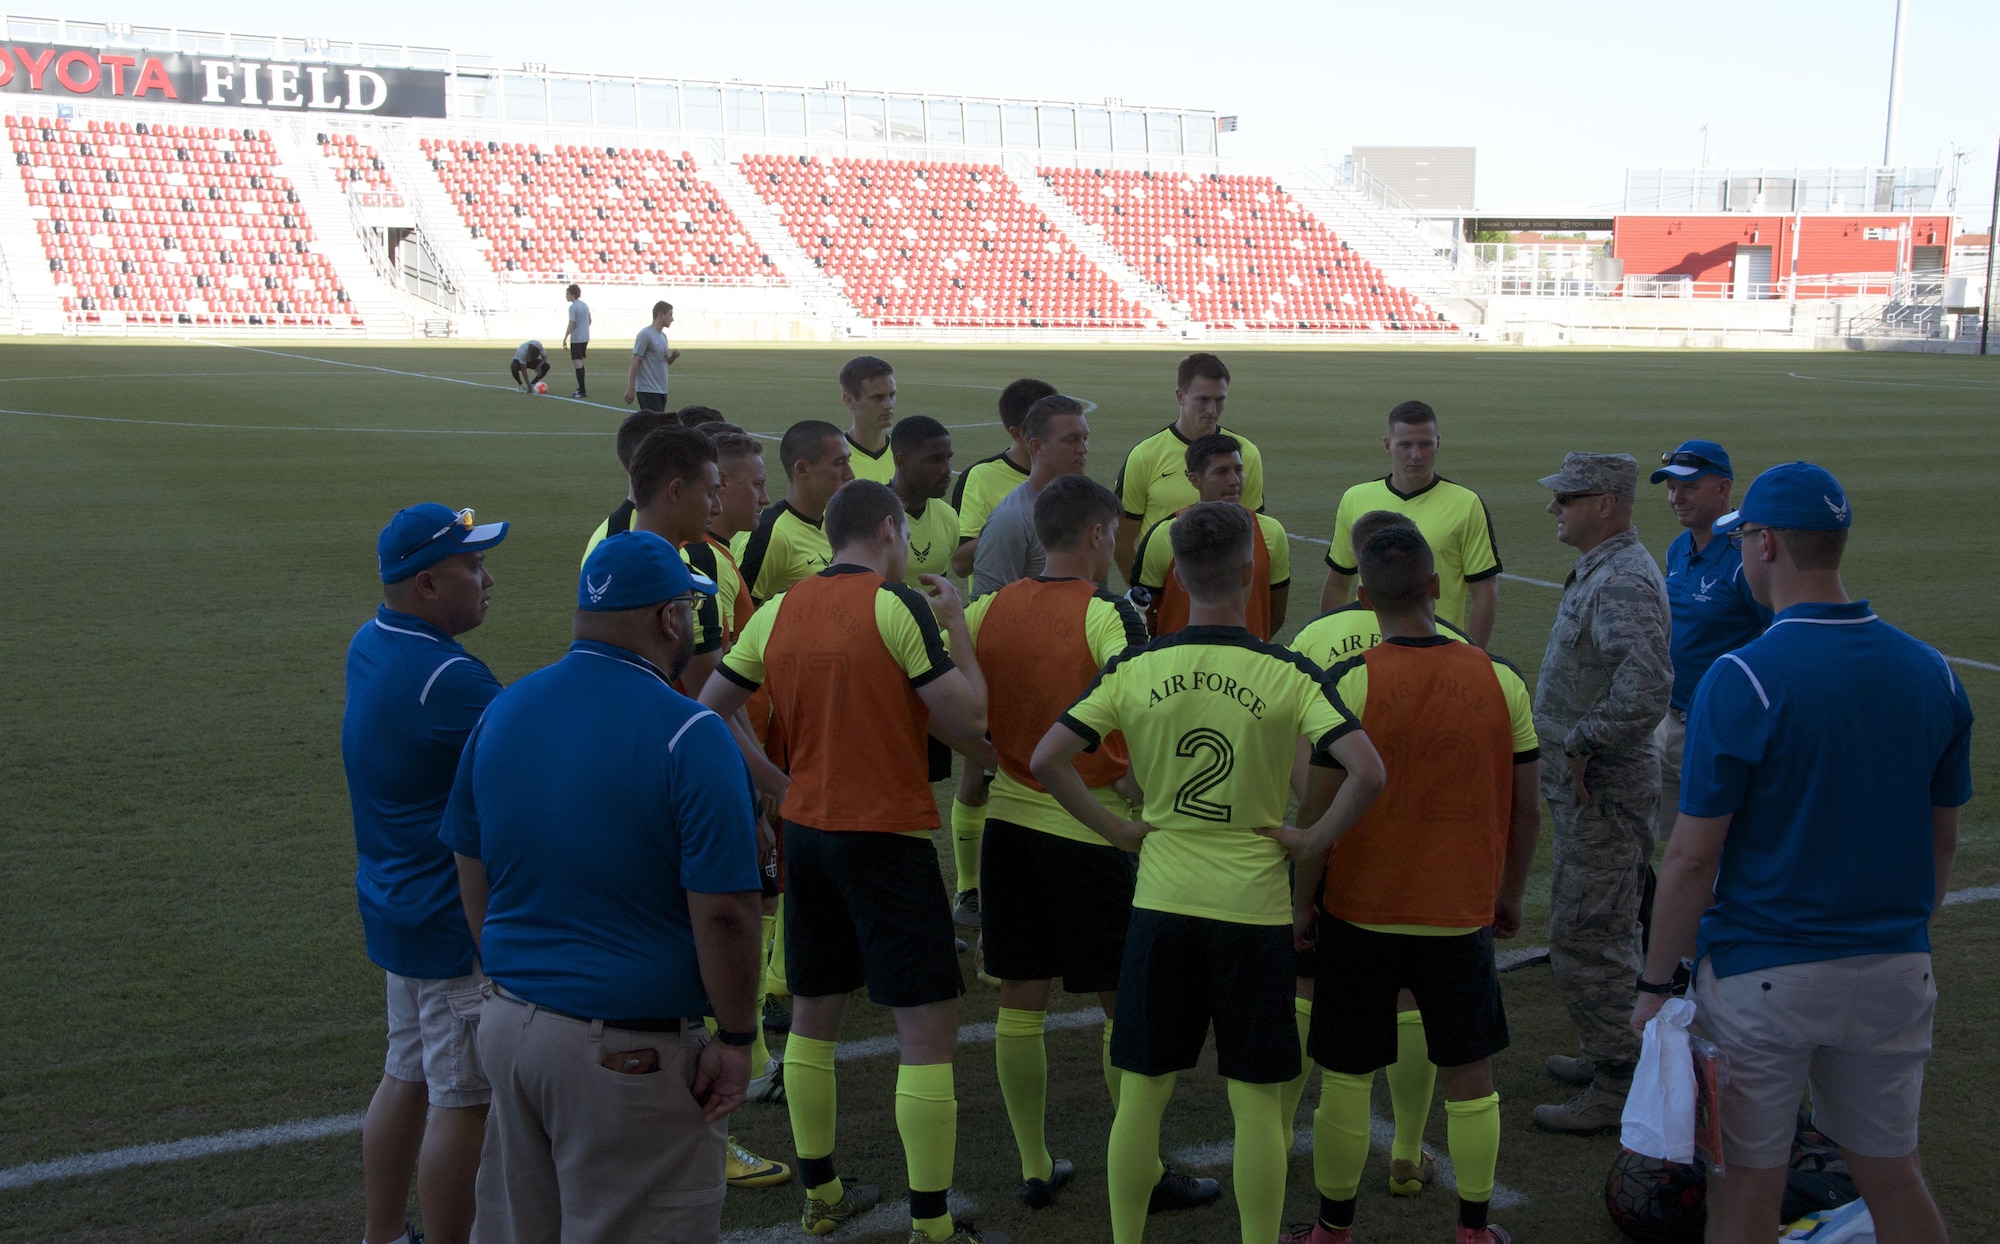 Col. Mike Lamb, Air Force Services Activity Operations director, addresses the 2016 All-Air Force men's soccer team before an exhibition match with the San Antonio Football Club at Toyota Field in San Antonio May 4. SAFC won the match, 3-0. (U.S. Air Force photo/Carole Chiles Fuller/Released)